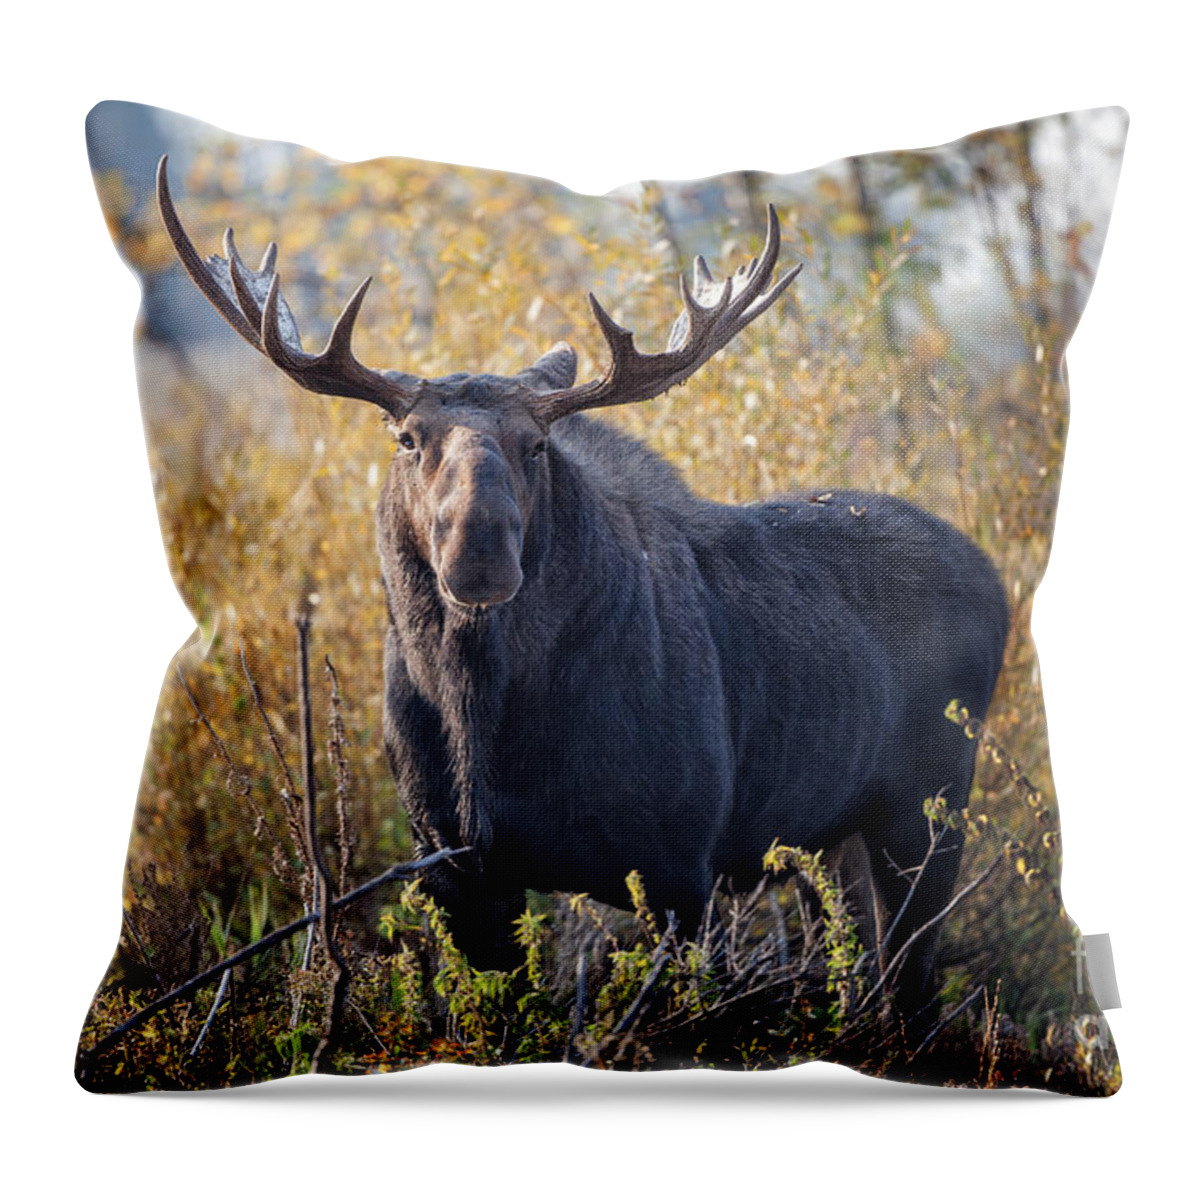 2012 Throw Pillow featuring the photograph Bull Moose by Ronald Lutz